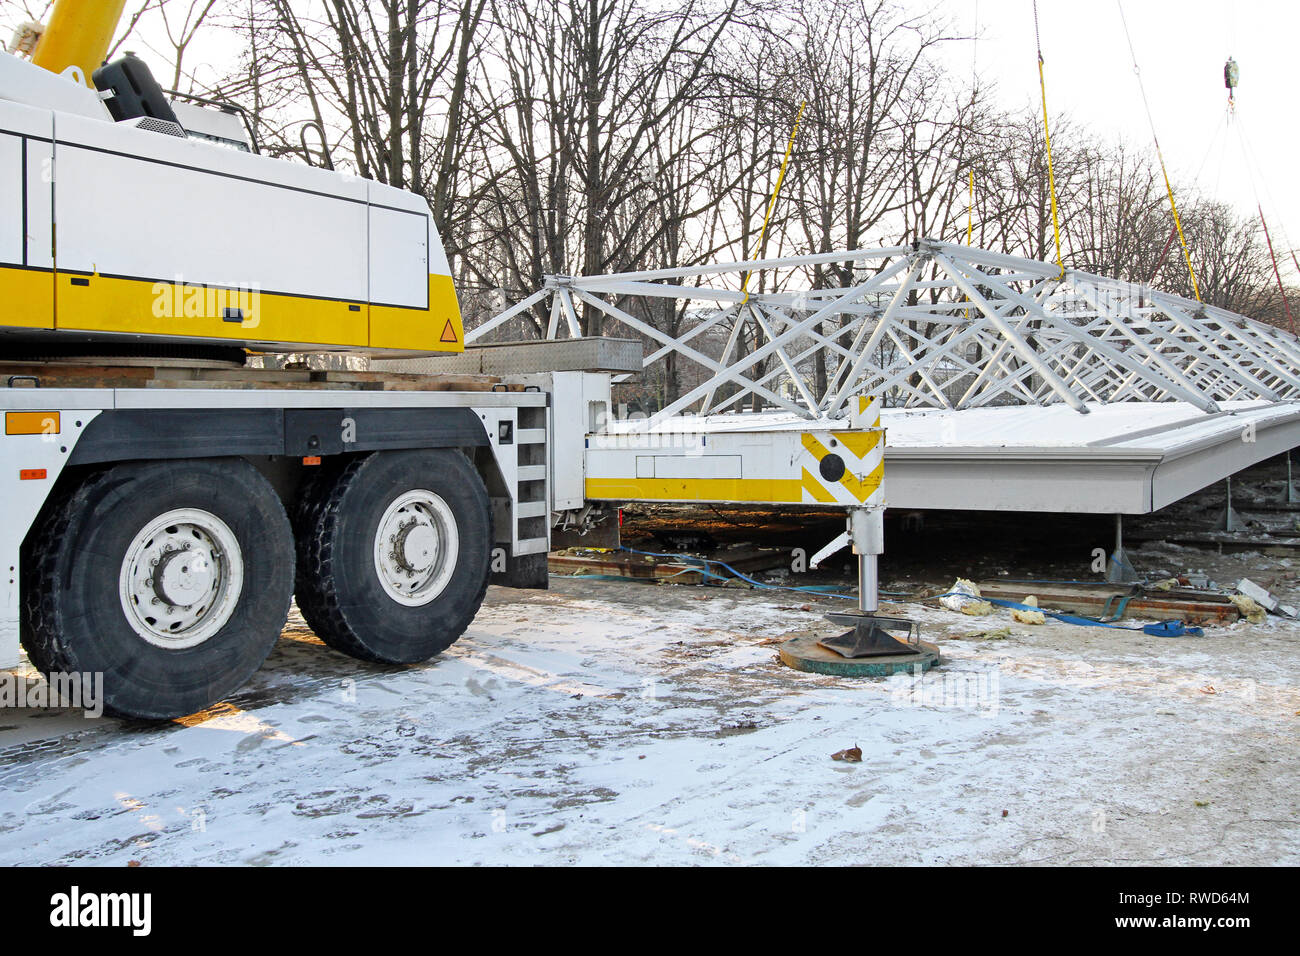 Crane Truck Lifting Heavy Steel Structure at Construction Site Stock Photo  - Alamy